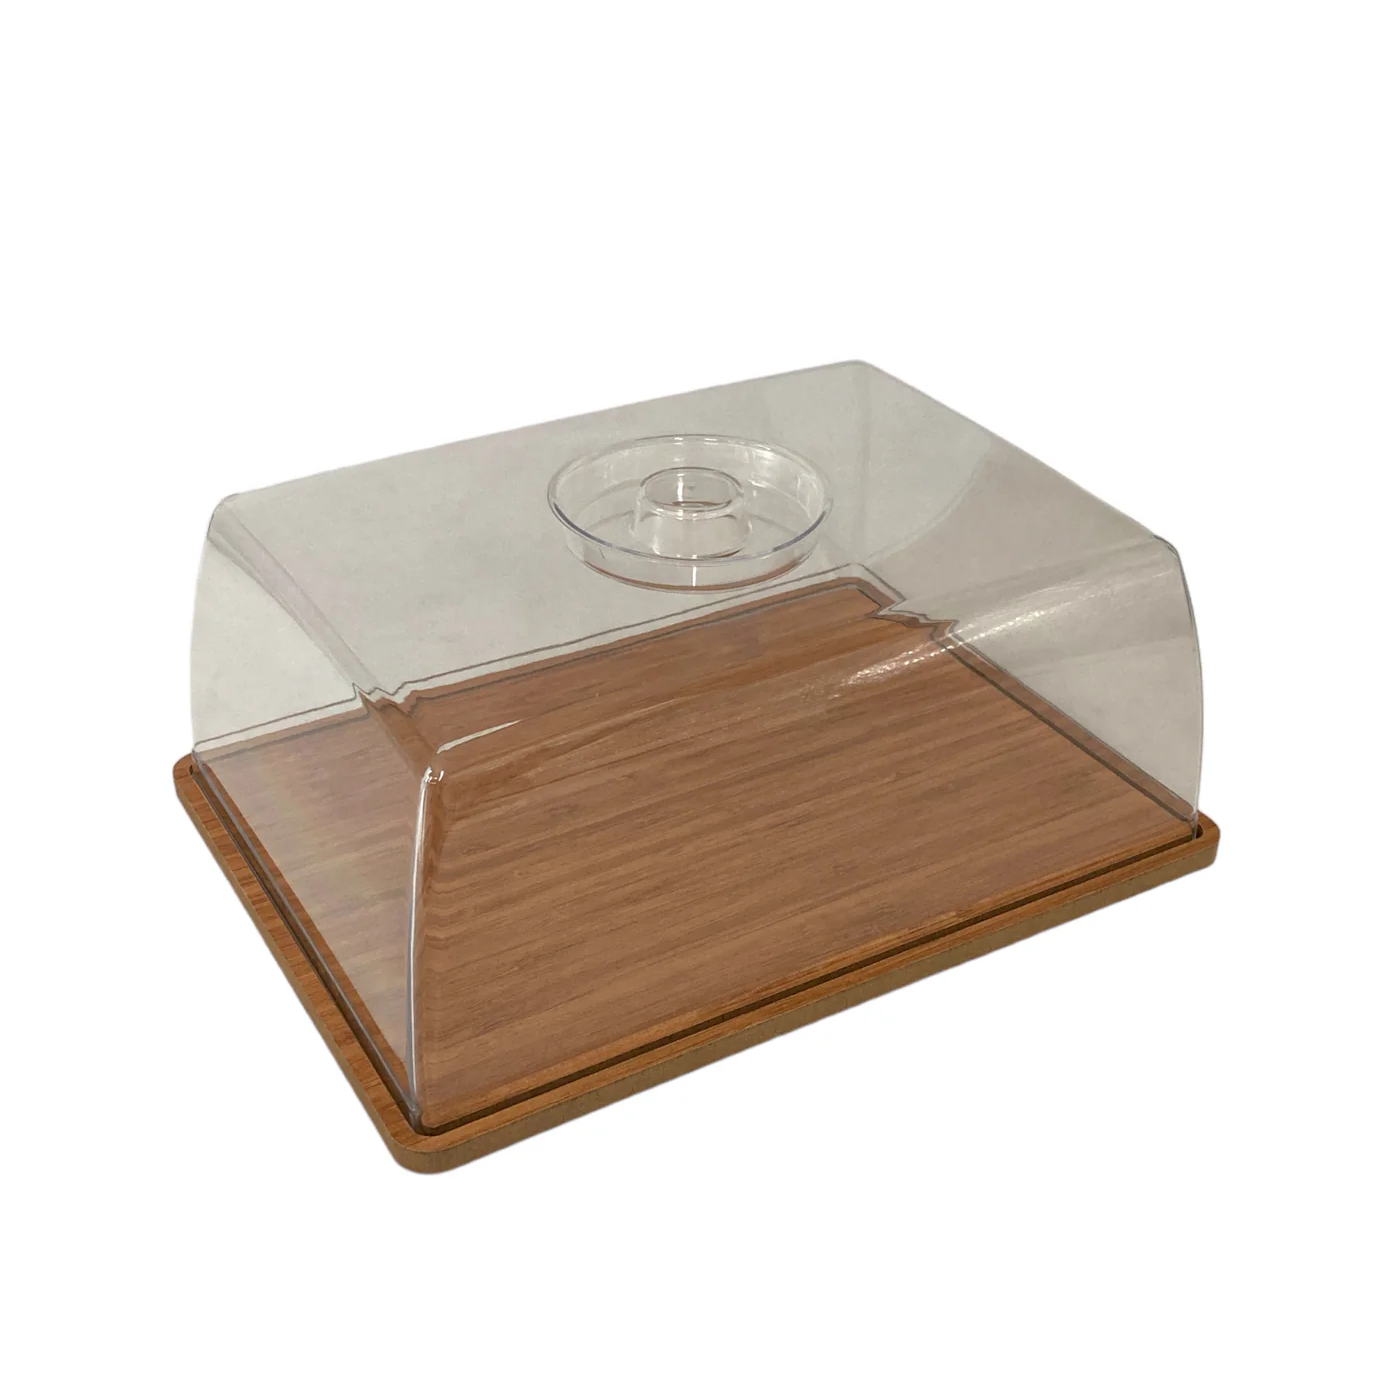 Rectangular Wooden Cheese or Cake Dome - Lunaz Shop